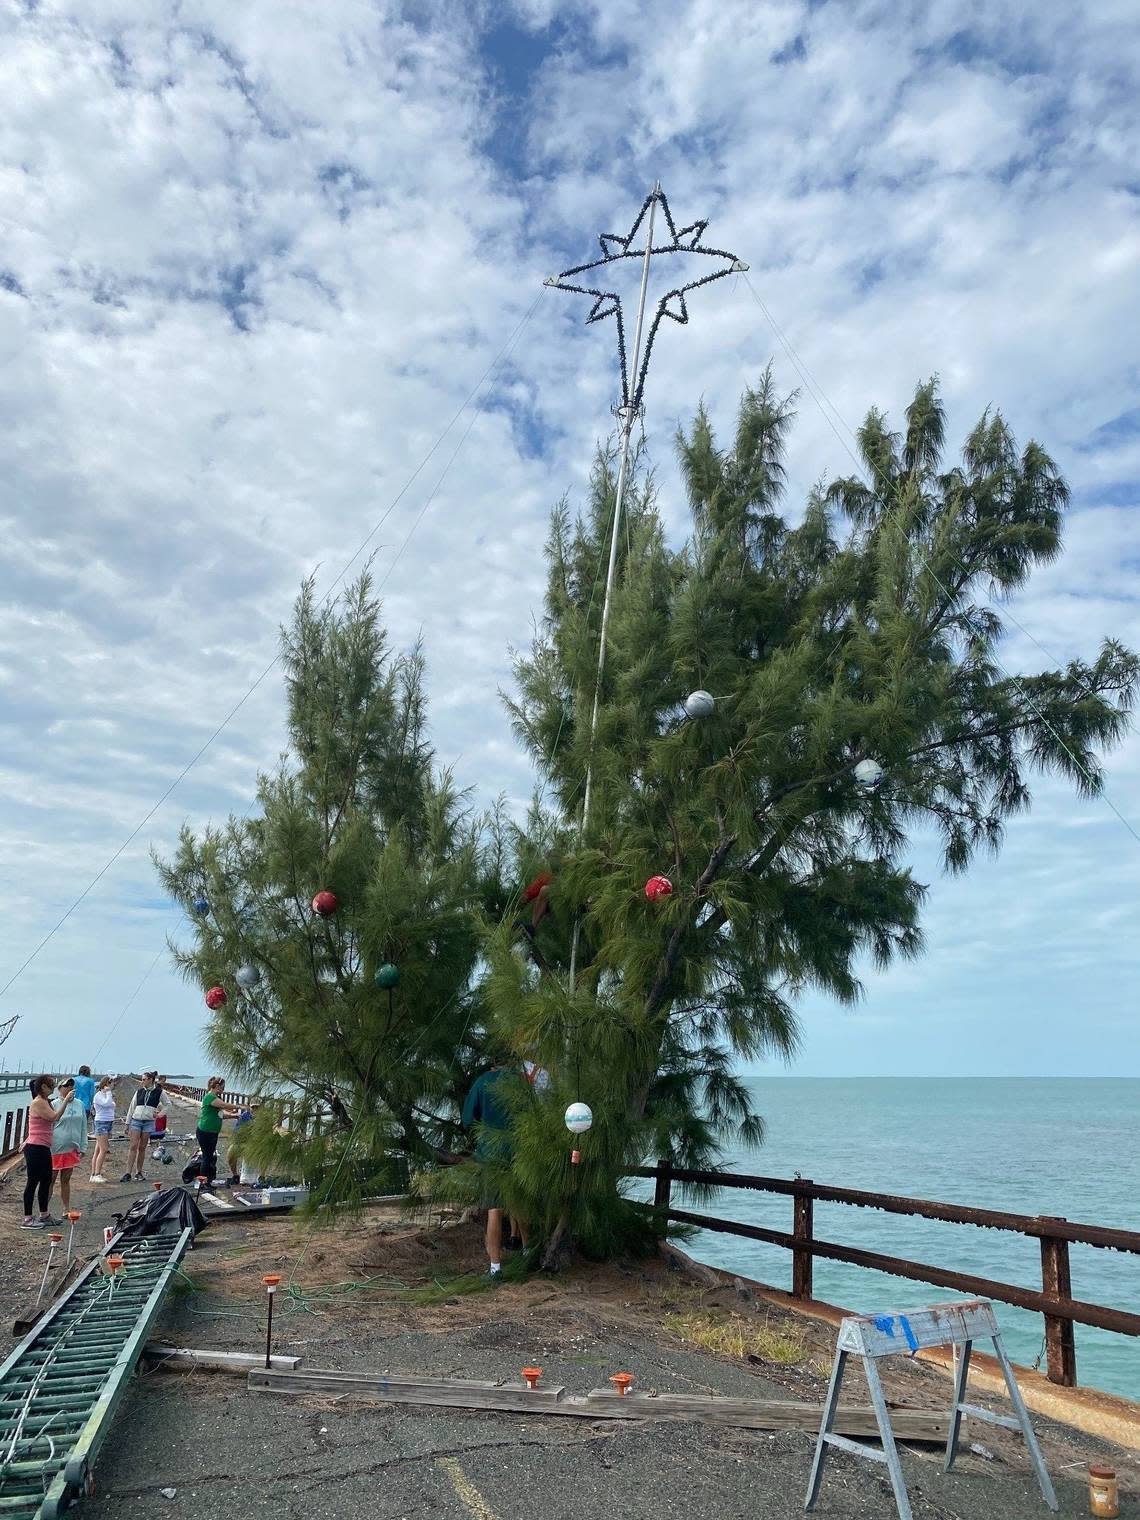 Every year, a crew of anonymous “elves” decorate the Australian pine known as Fred the Tree on a section of the old Seven Mile Bridge in the Florida Keys.